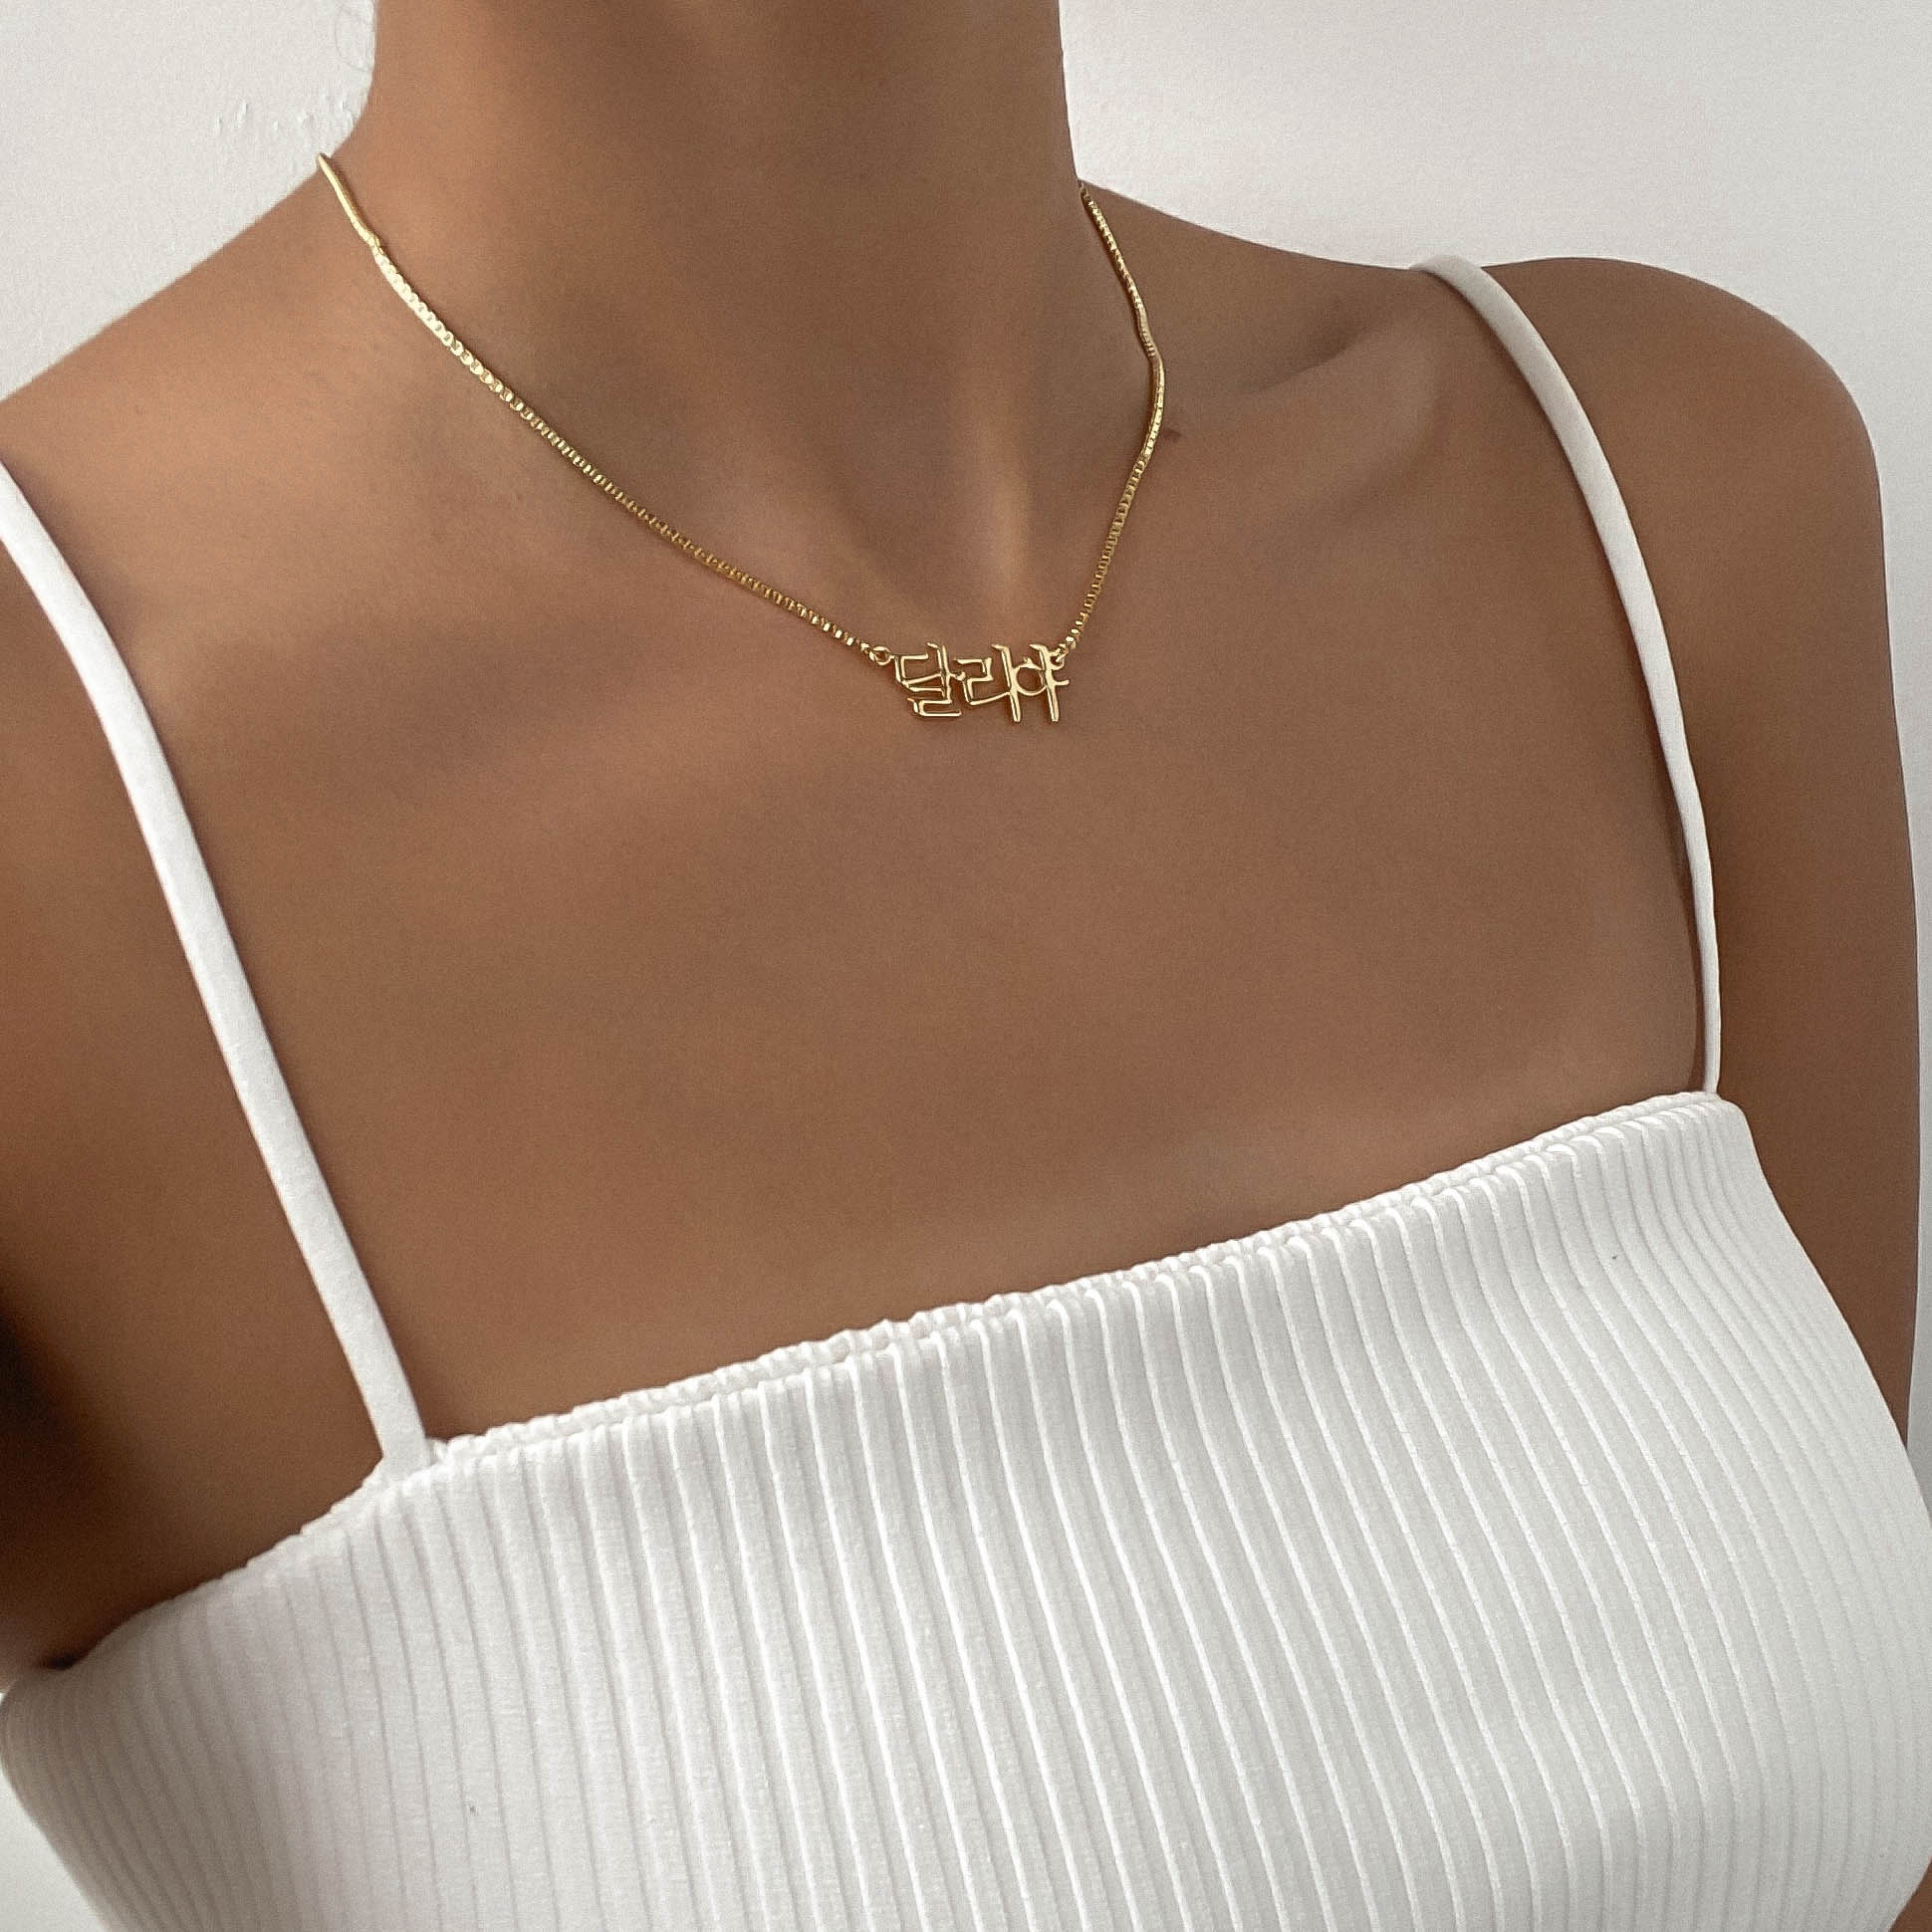 Woman wearing a white tank top with gold Korean name necklace